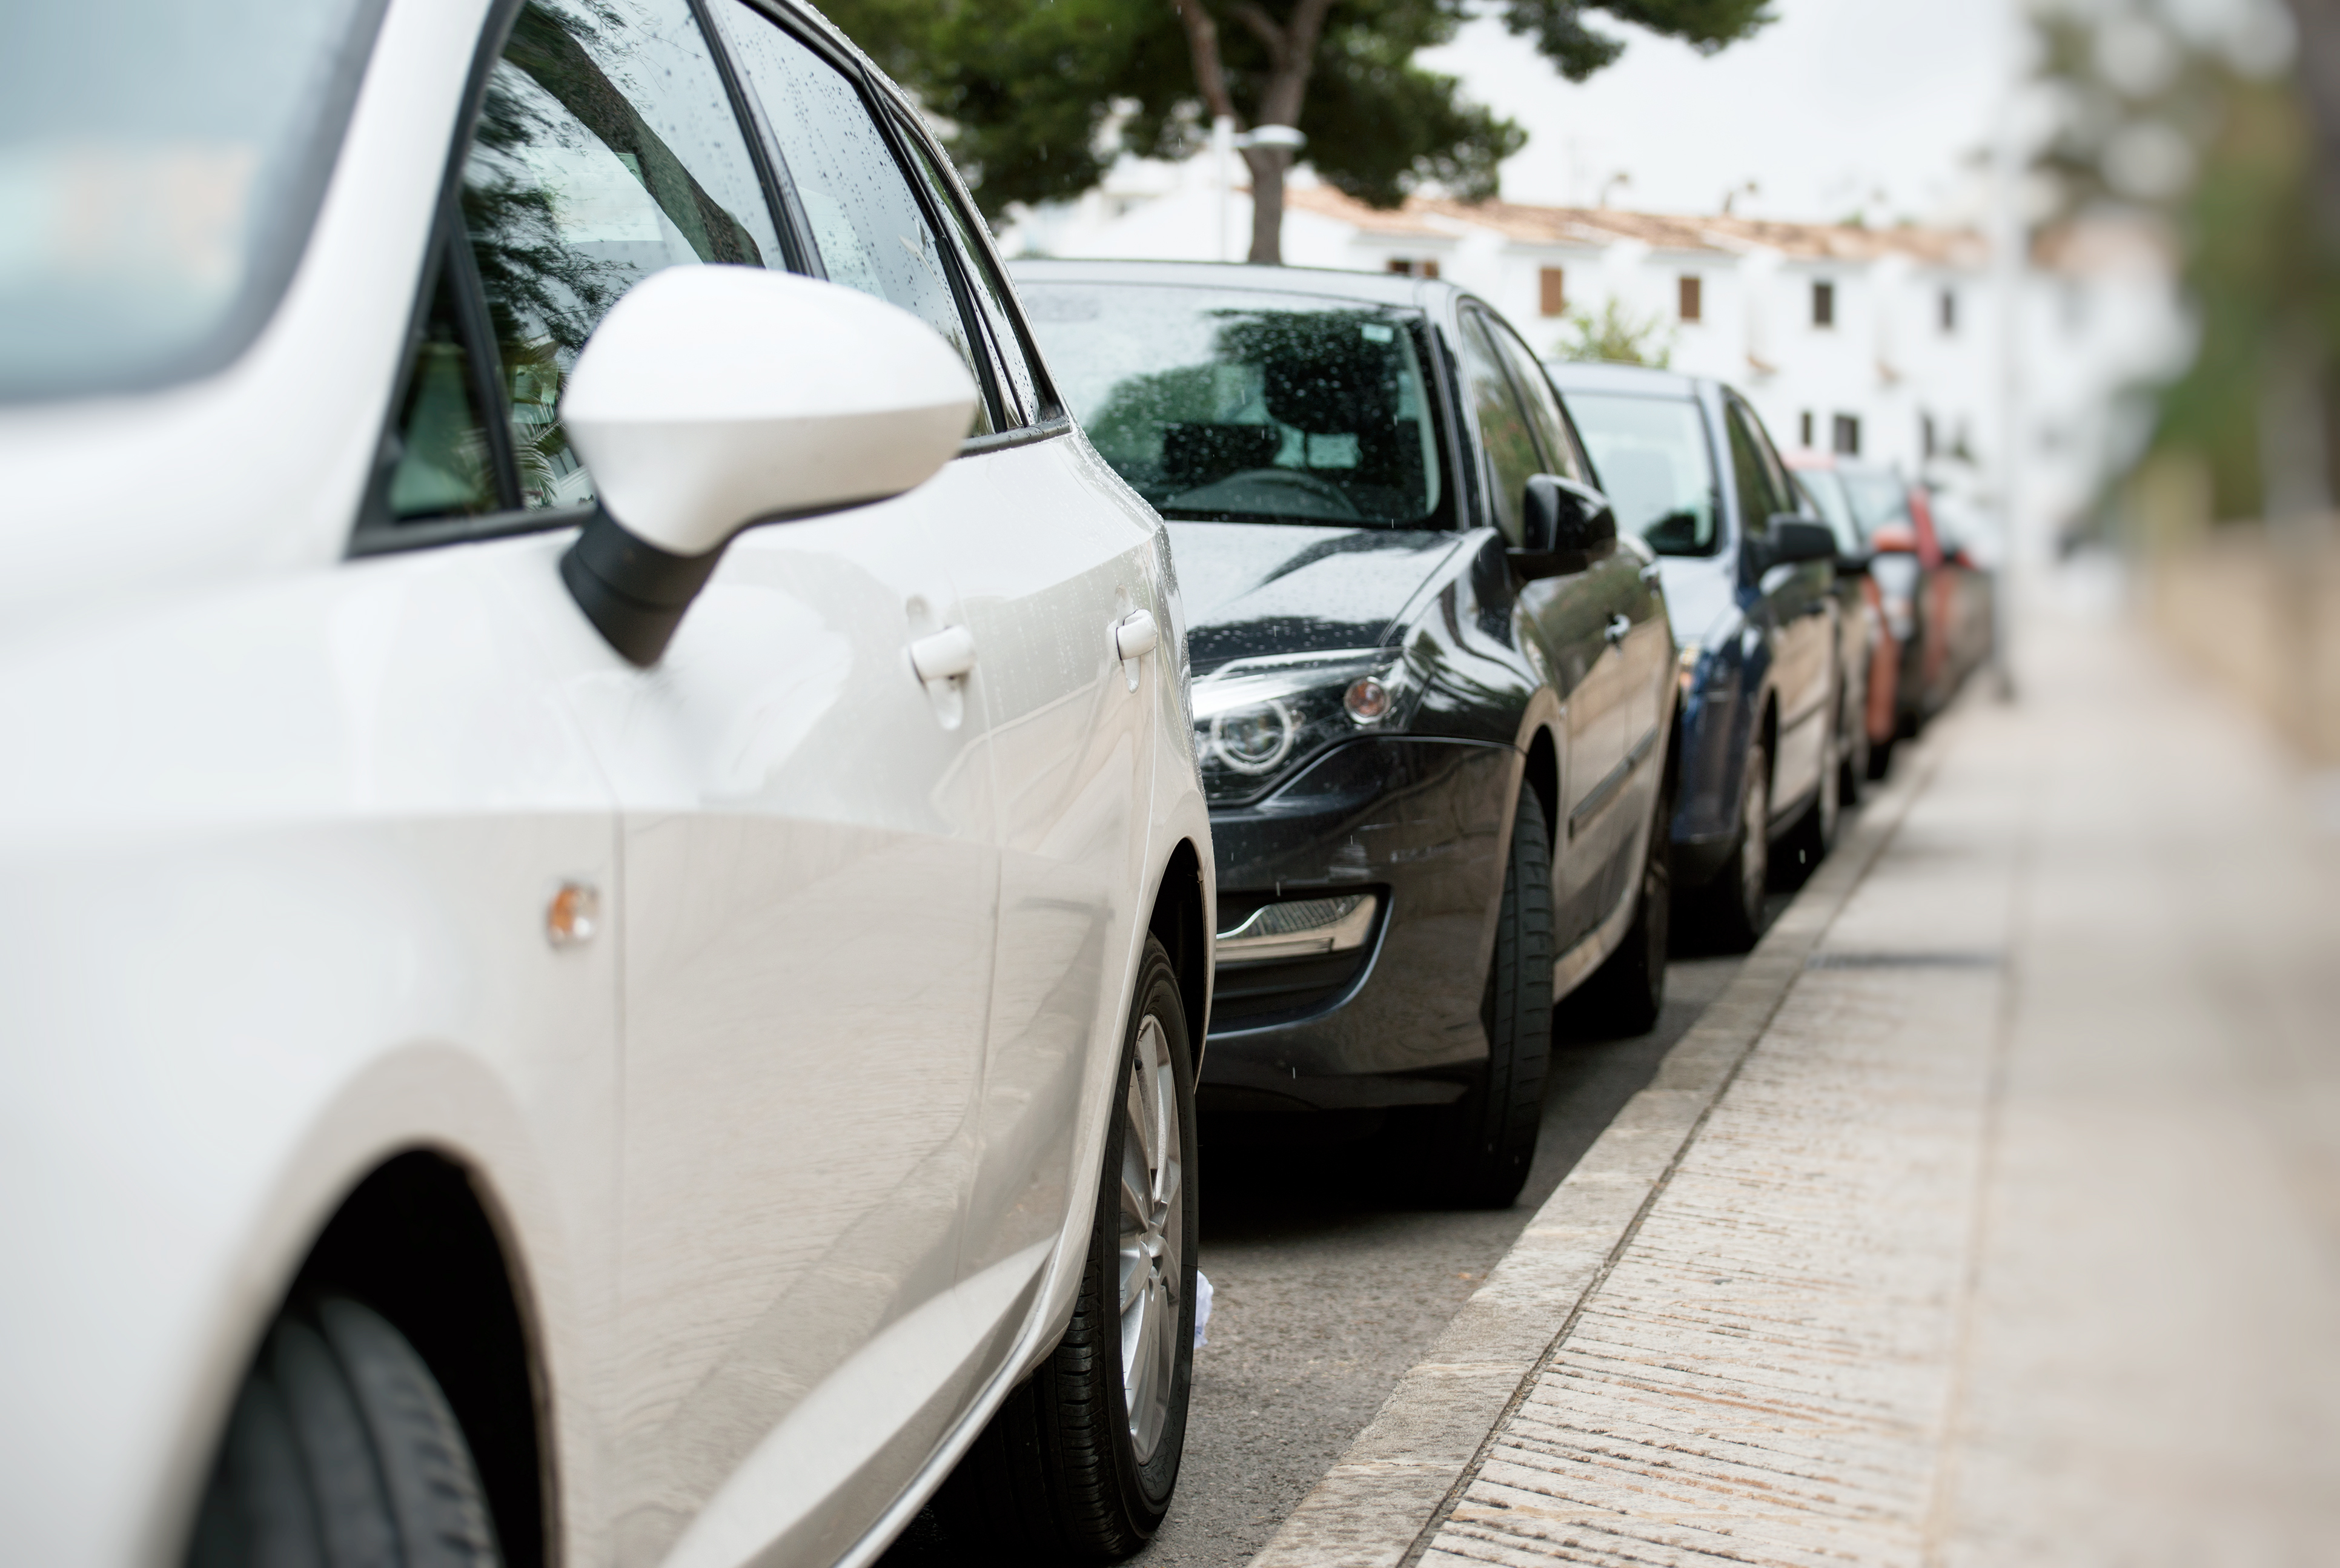 Cars parked along the street | Source: Shutterstock